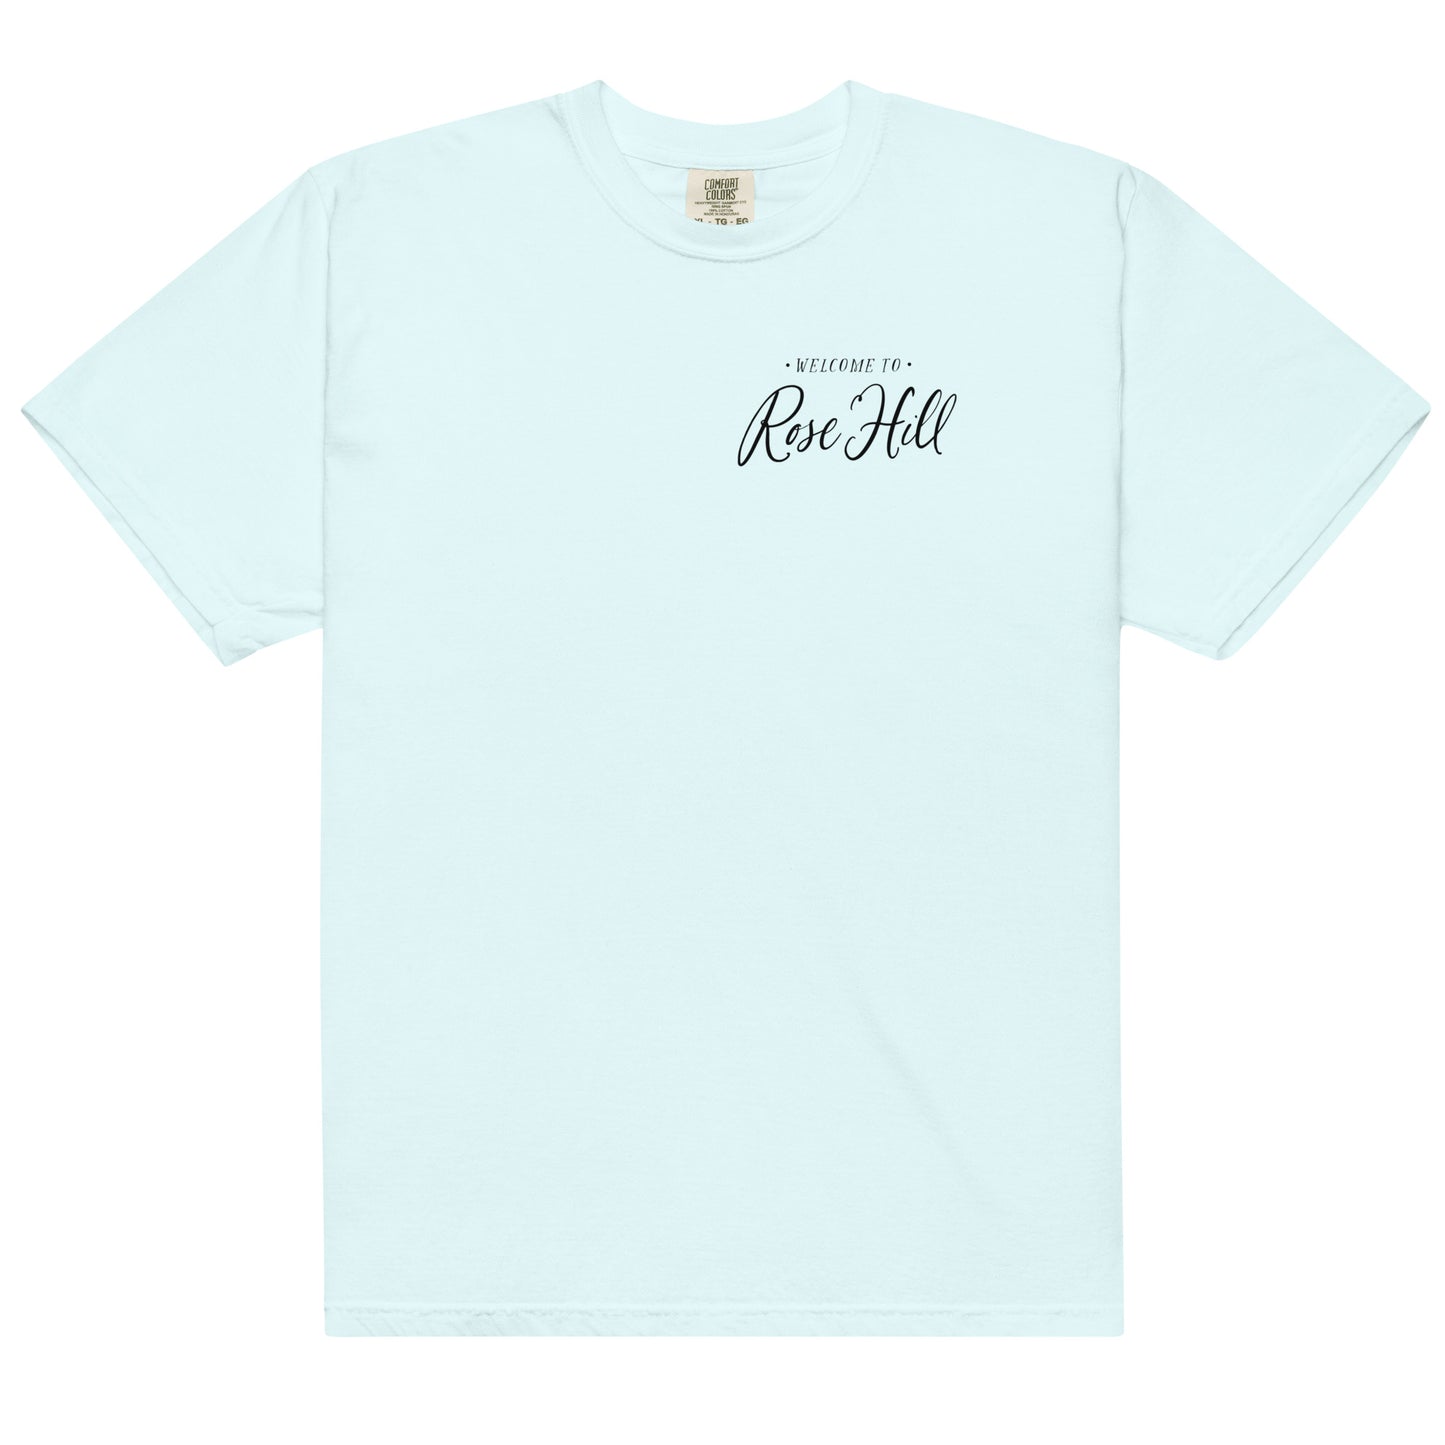 Welcome to Rose Hill / Wild Love by Elsie Silver heavyweight t-shirt